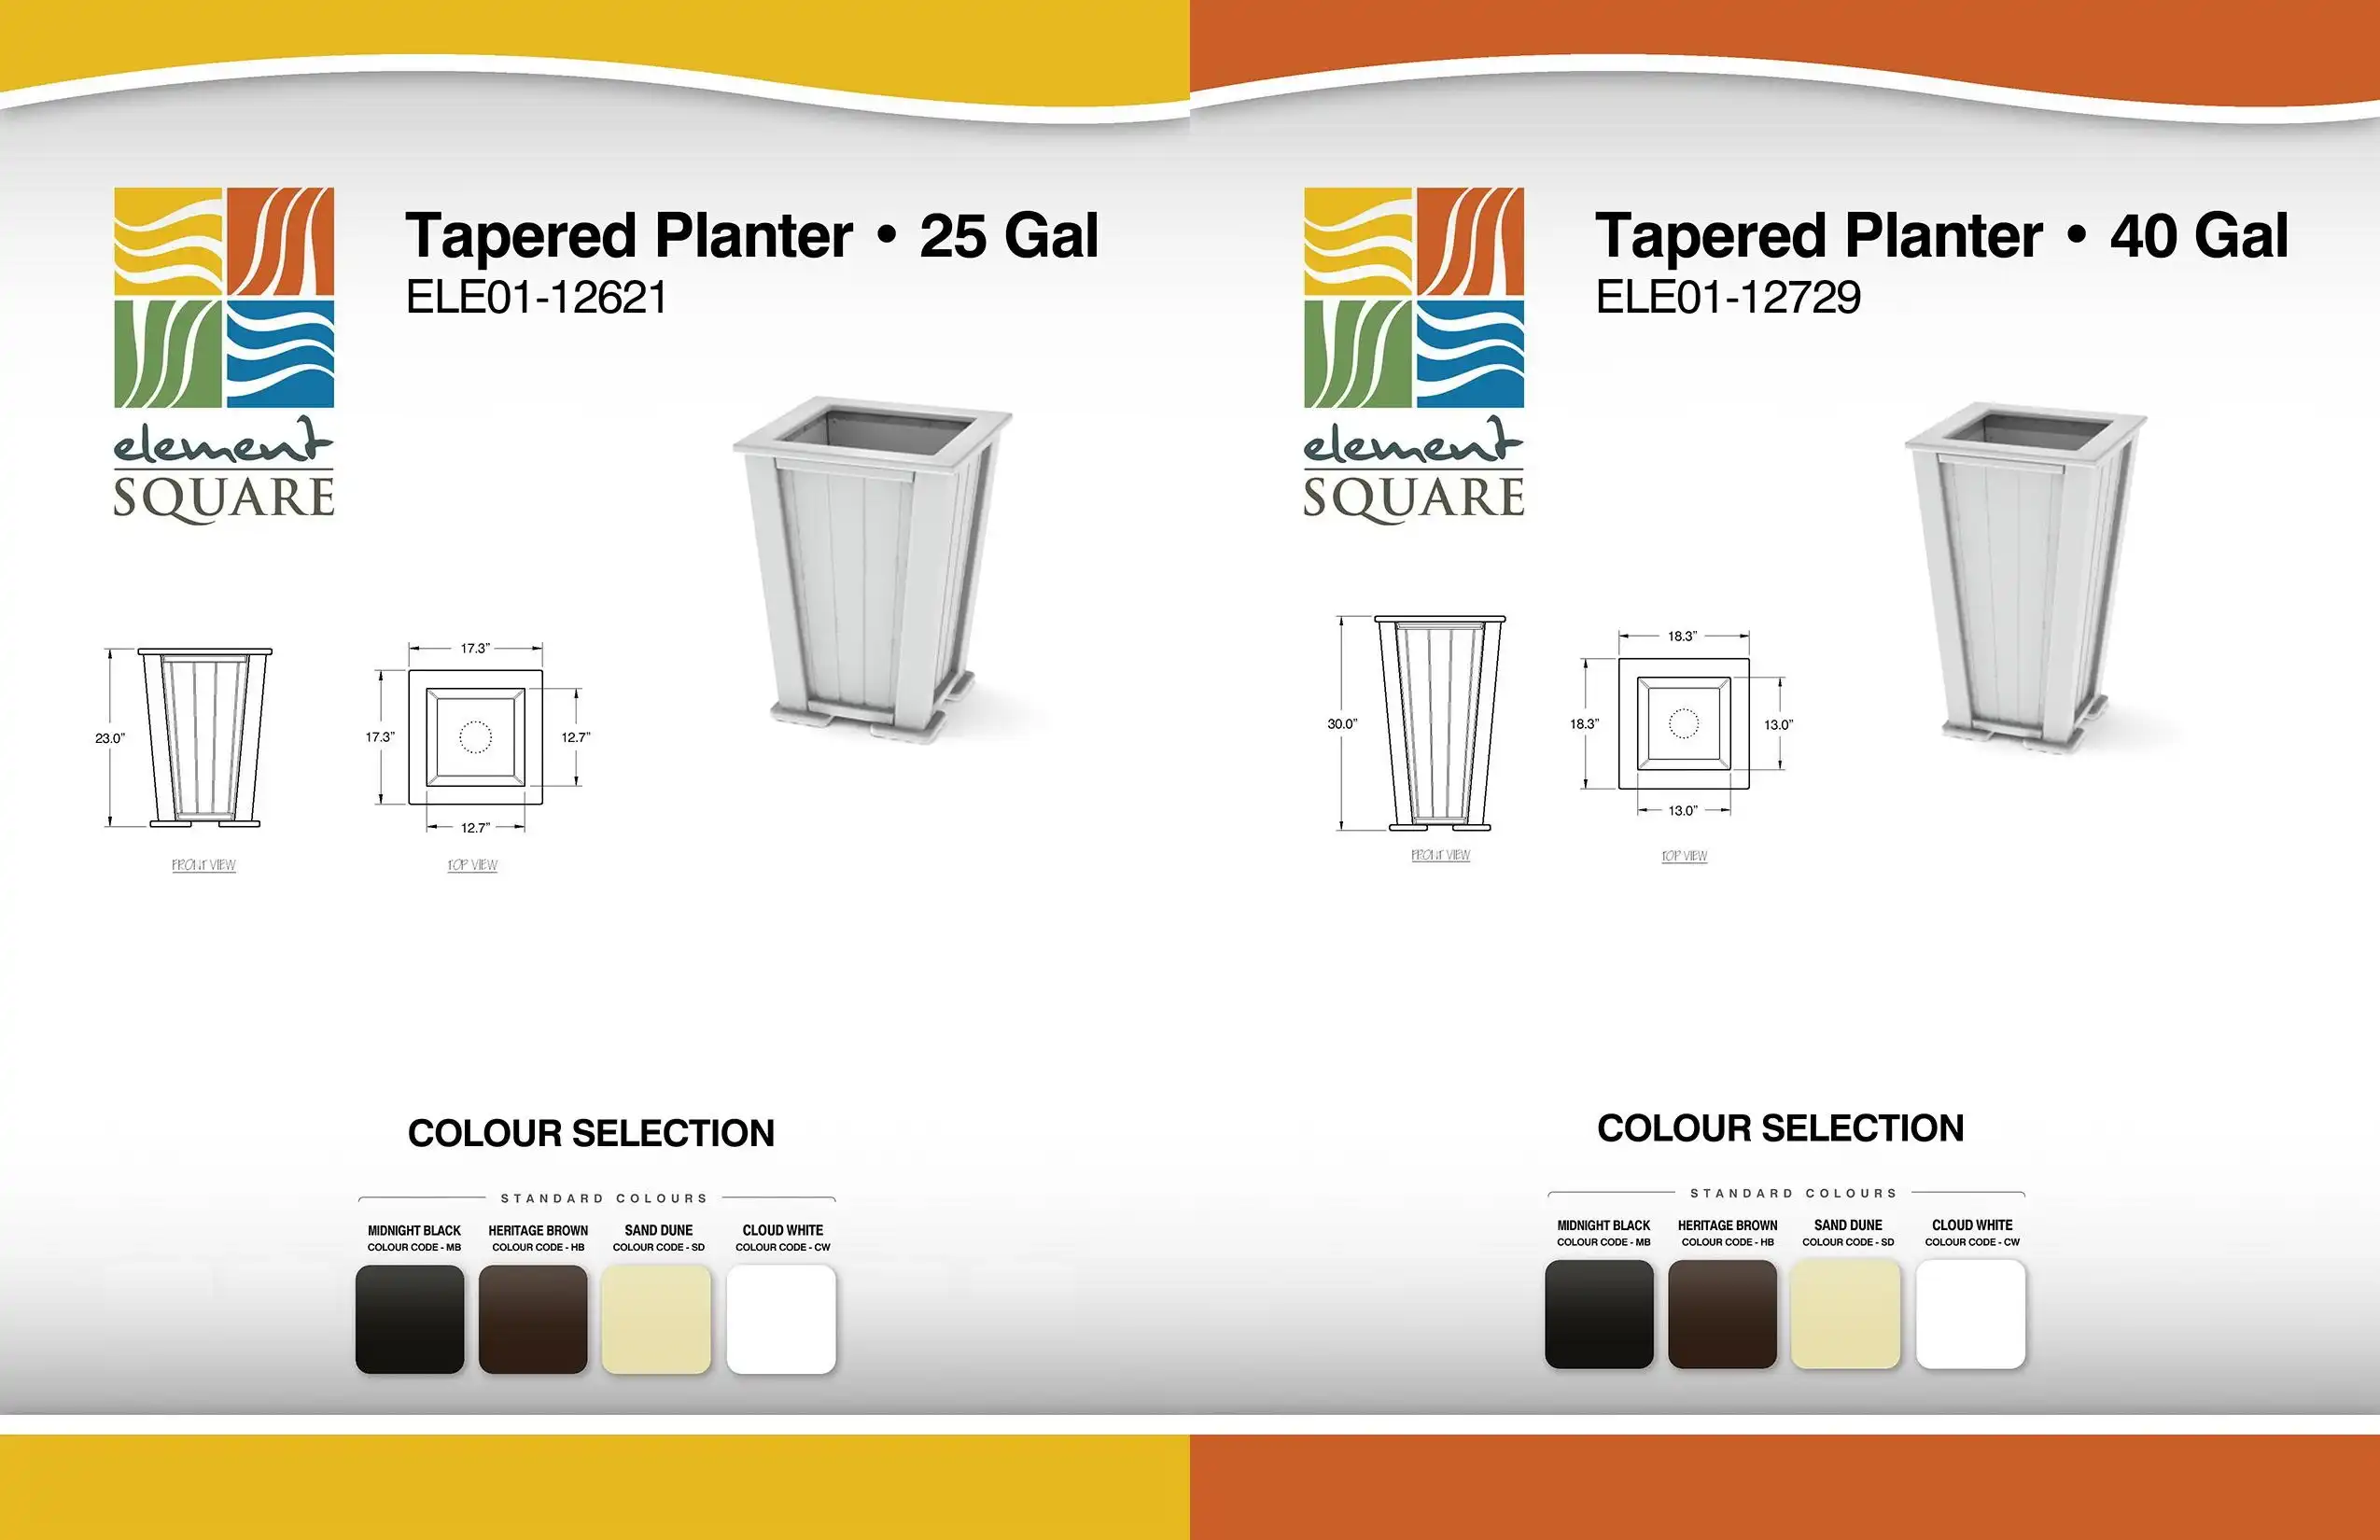 25 Gal & 40 Gal TAPERED PLANTERs by Element Square